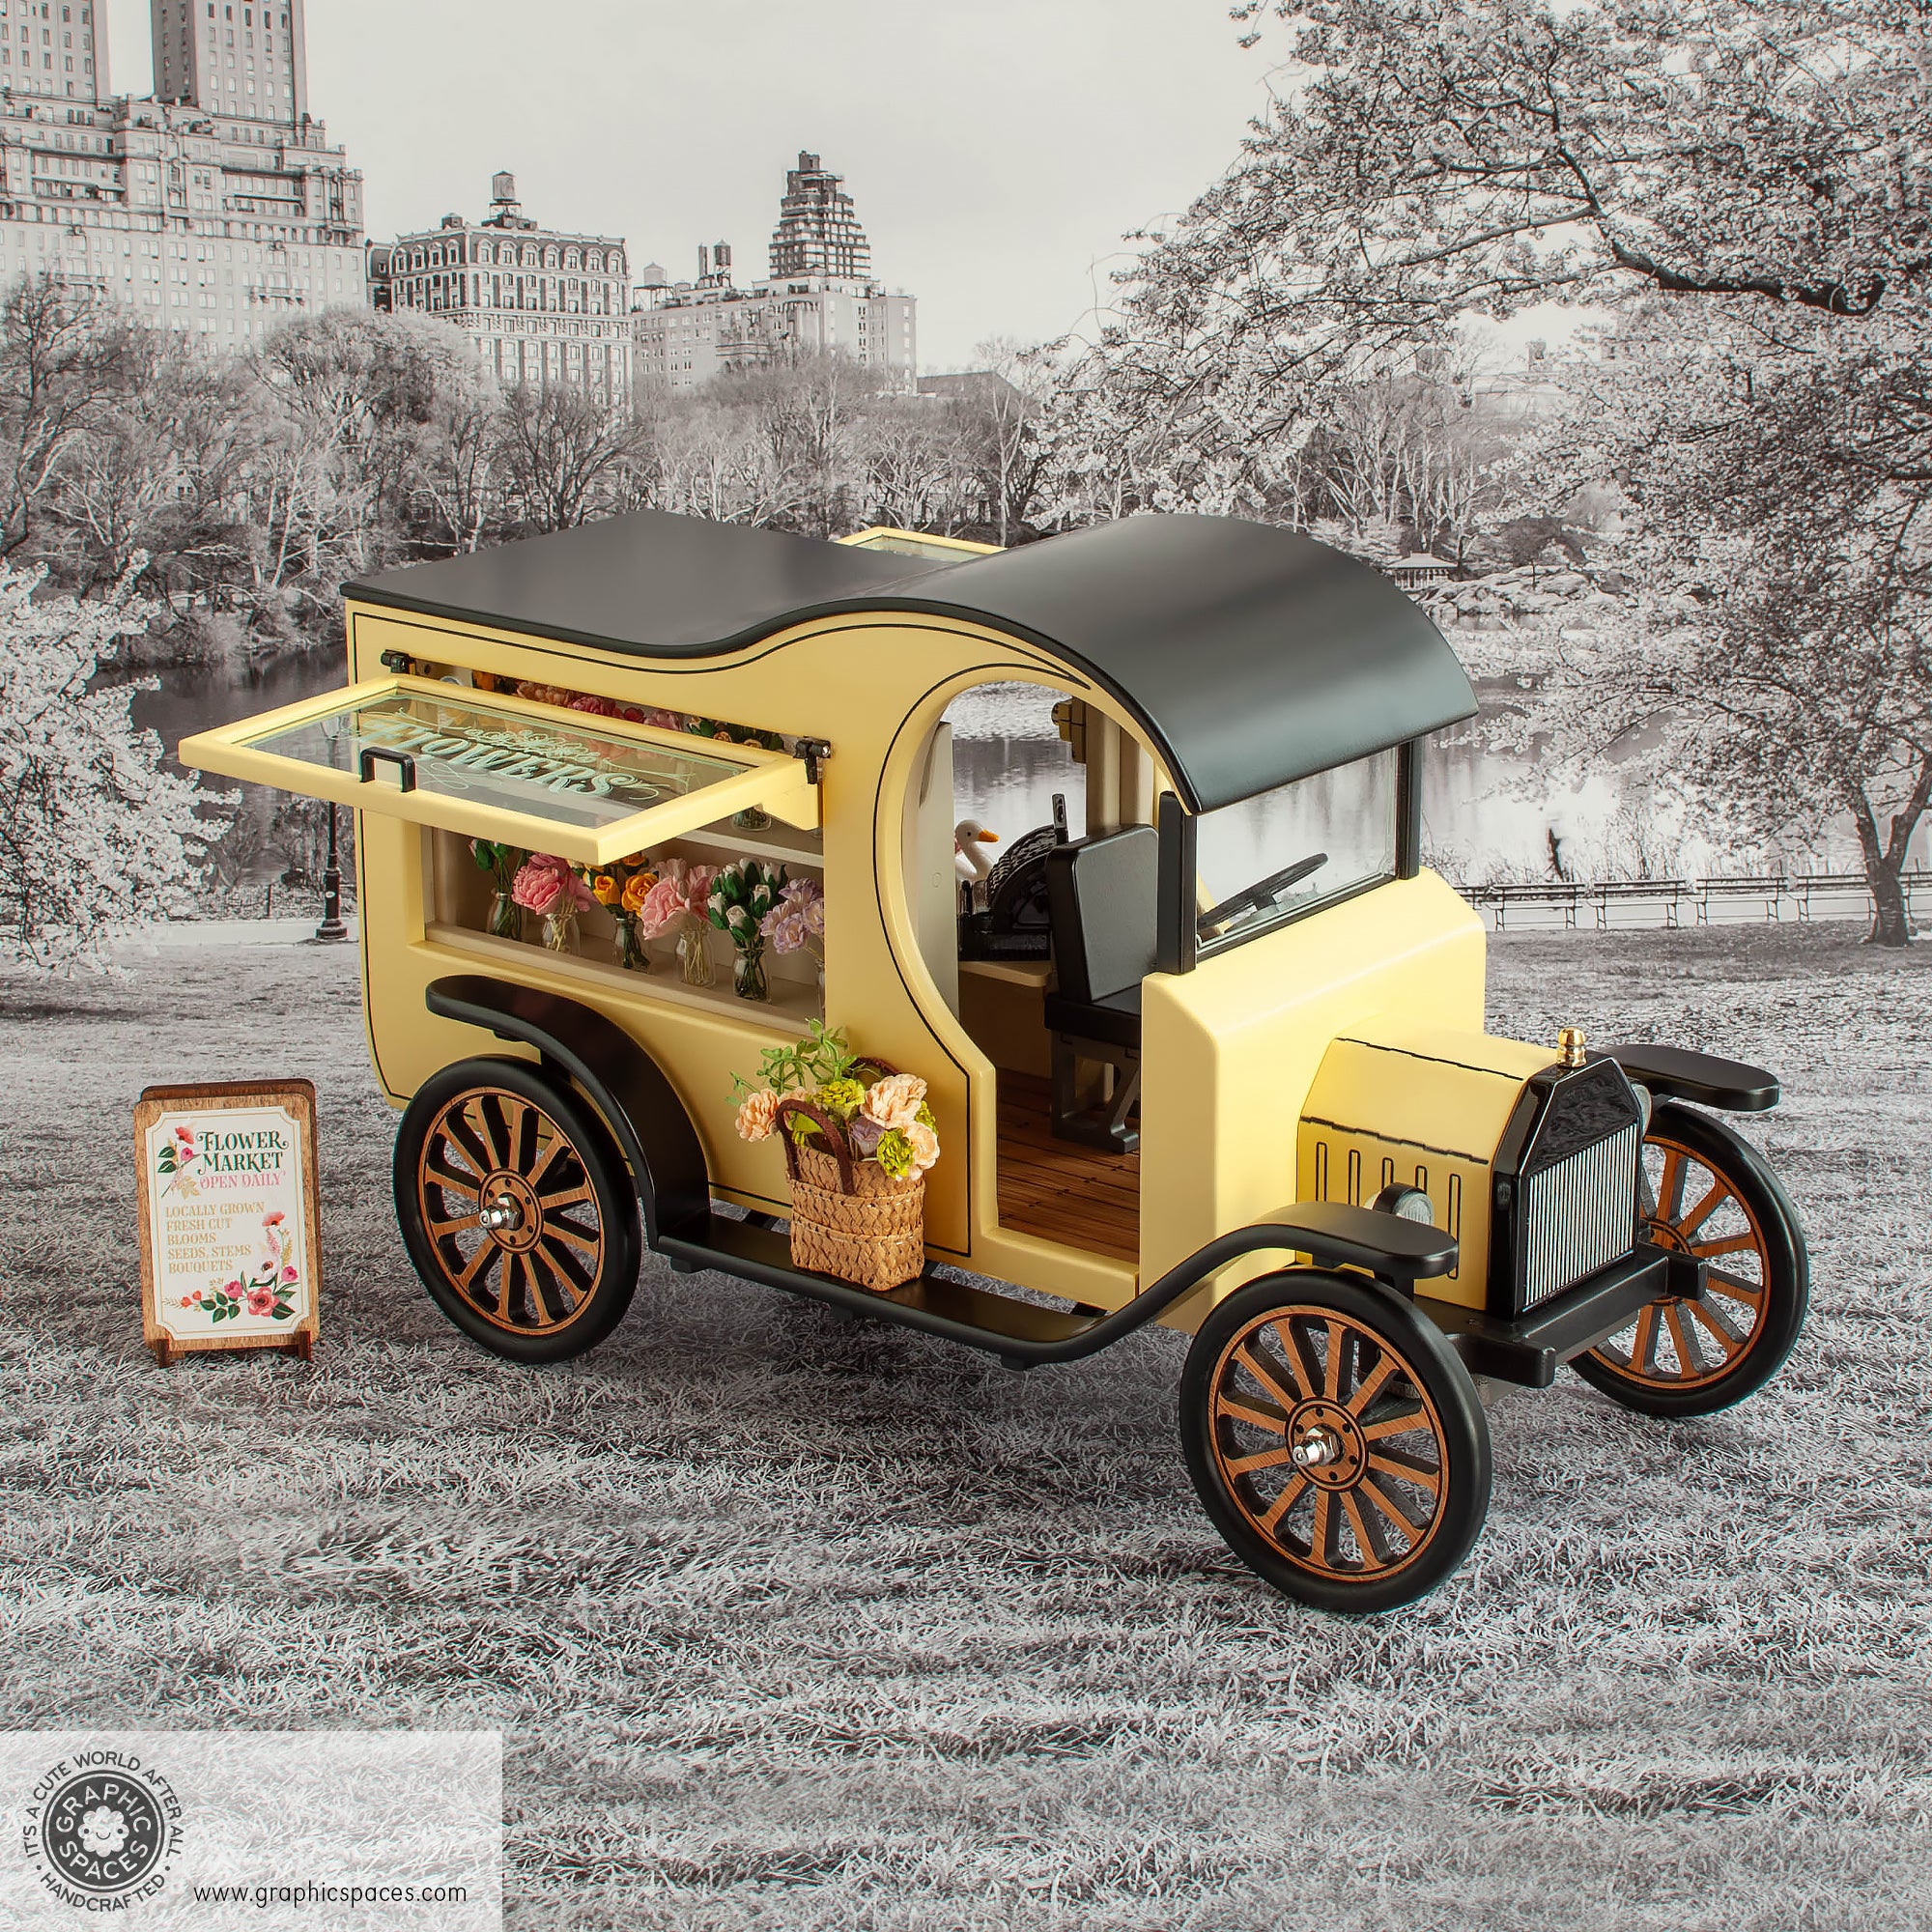 1:12 Scale Room Box Yellow Flower Shop Truck Model-T C-Cab. Passenger side view in park setting. Window displaying flowers.